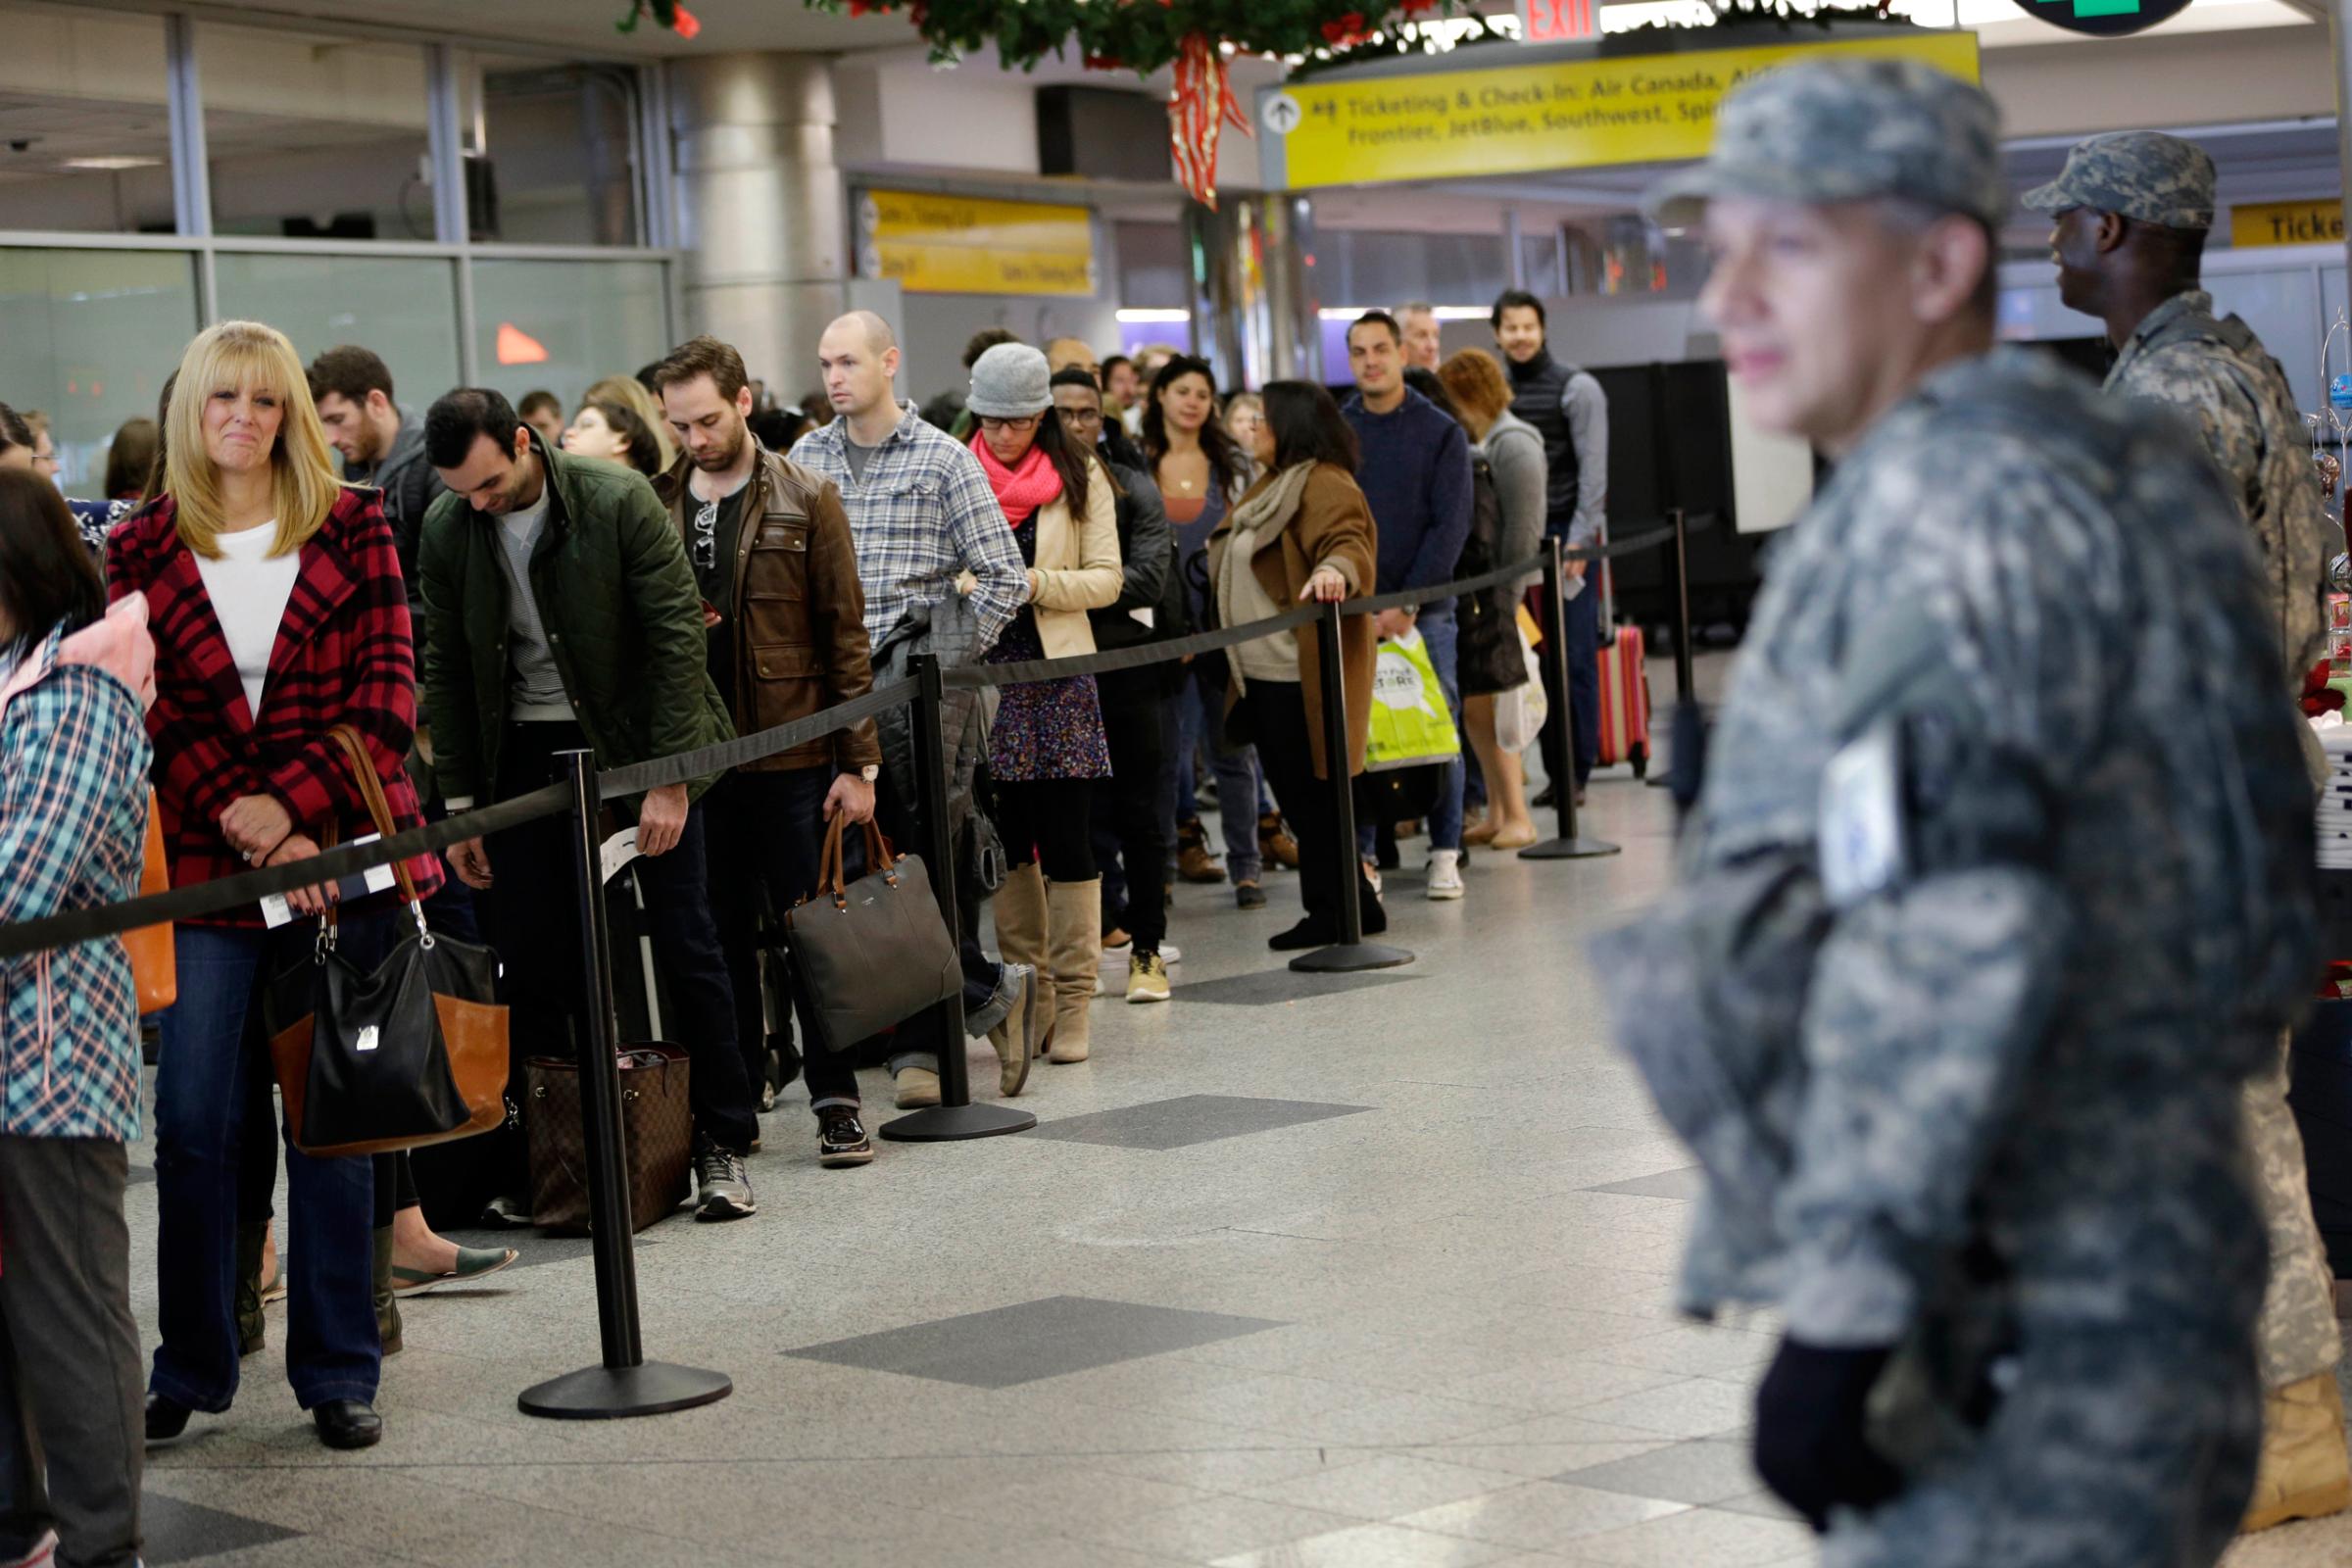 Security personnel looks on as passengers wait to pass through airline security at LaGuardia Airport in New York, Wednesday, Nov. 25, 2015. An expanded version of America's annual Thanksgiving travel saga was under way Wednesday with gas prices low and terrorism fears high. An estimated 46.9 million Americans are expected to take a car, plane, bus or train at least 50 miles from home over the long holiday weekend, according to the motoring organization AAA. That would be an increase of more than 300,000 people over last year, and the most travelers since 2007. (AP Photo/Seth Wenig)